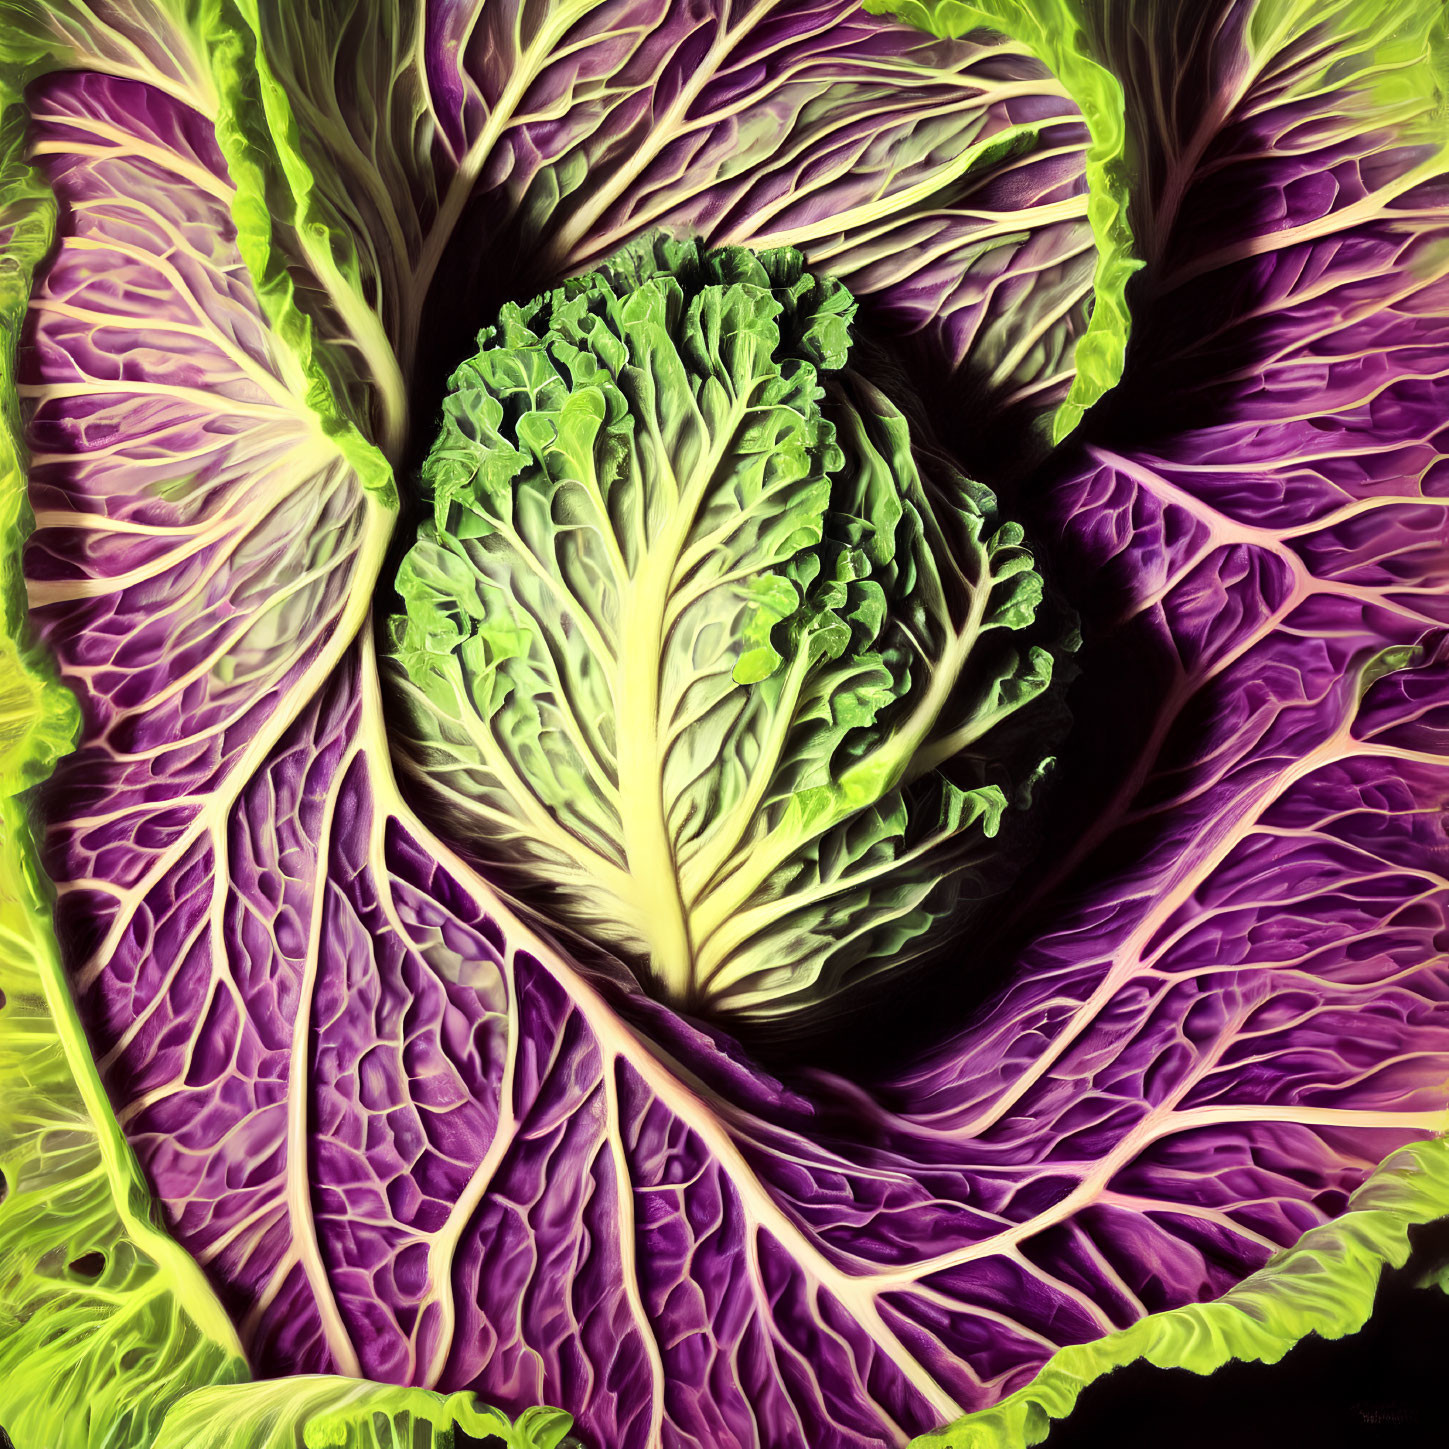 Colorful digital artwork: Purple cabbage with intricate leaf patterns